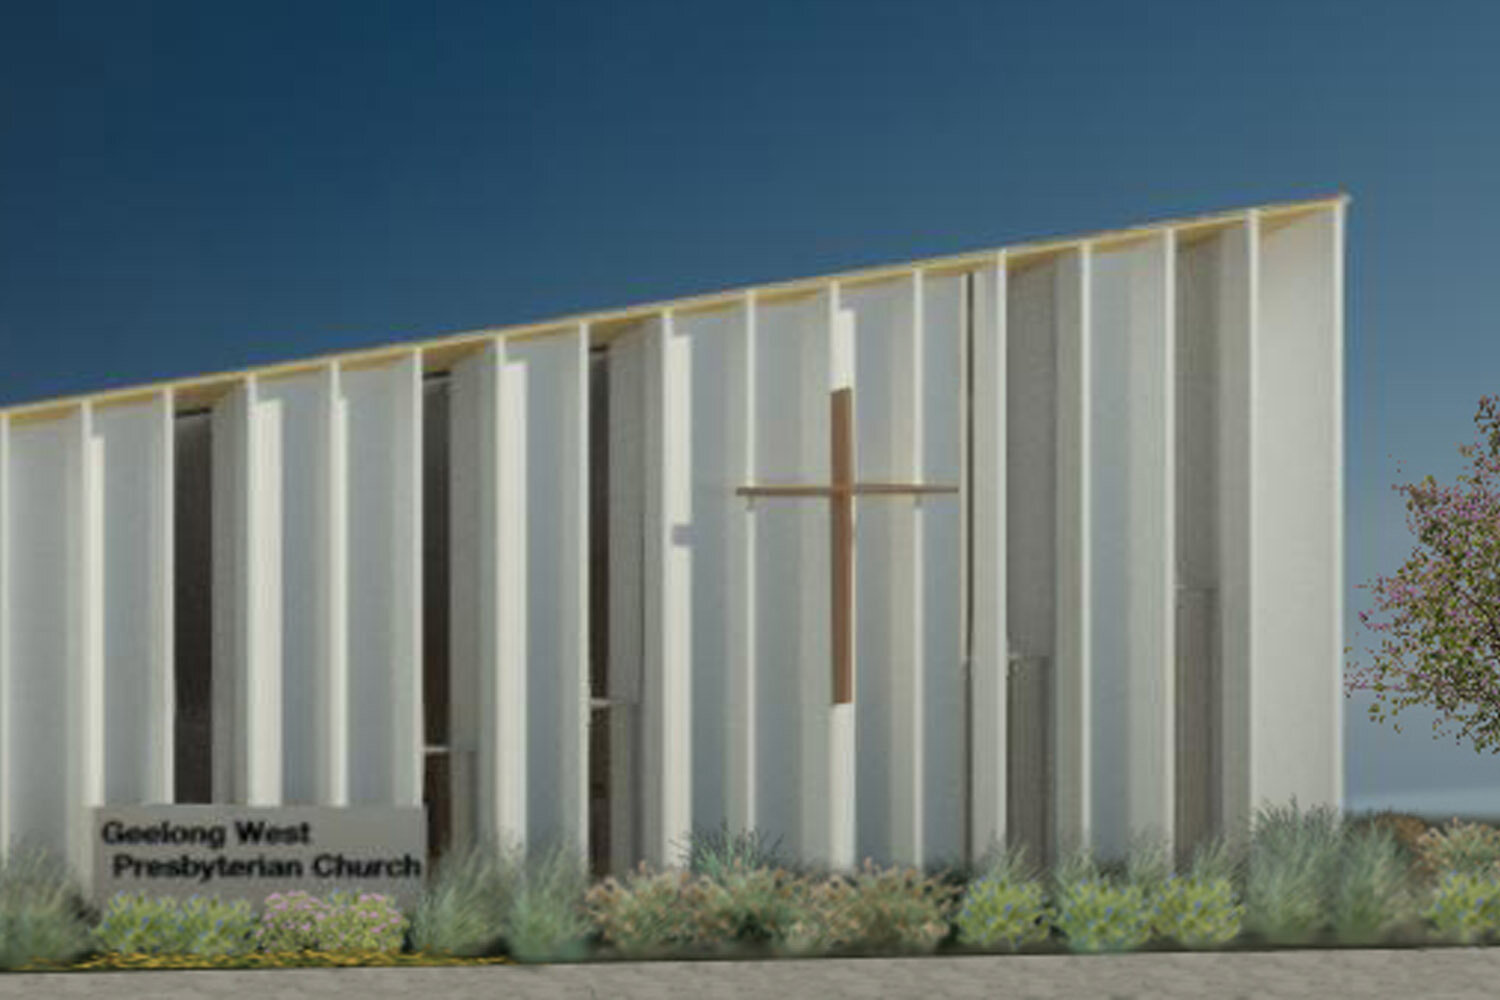 geelong-church-melbourne-by-warc-studio-architects-06.jpg